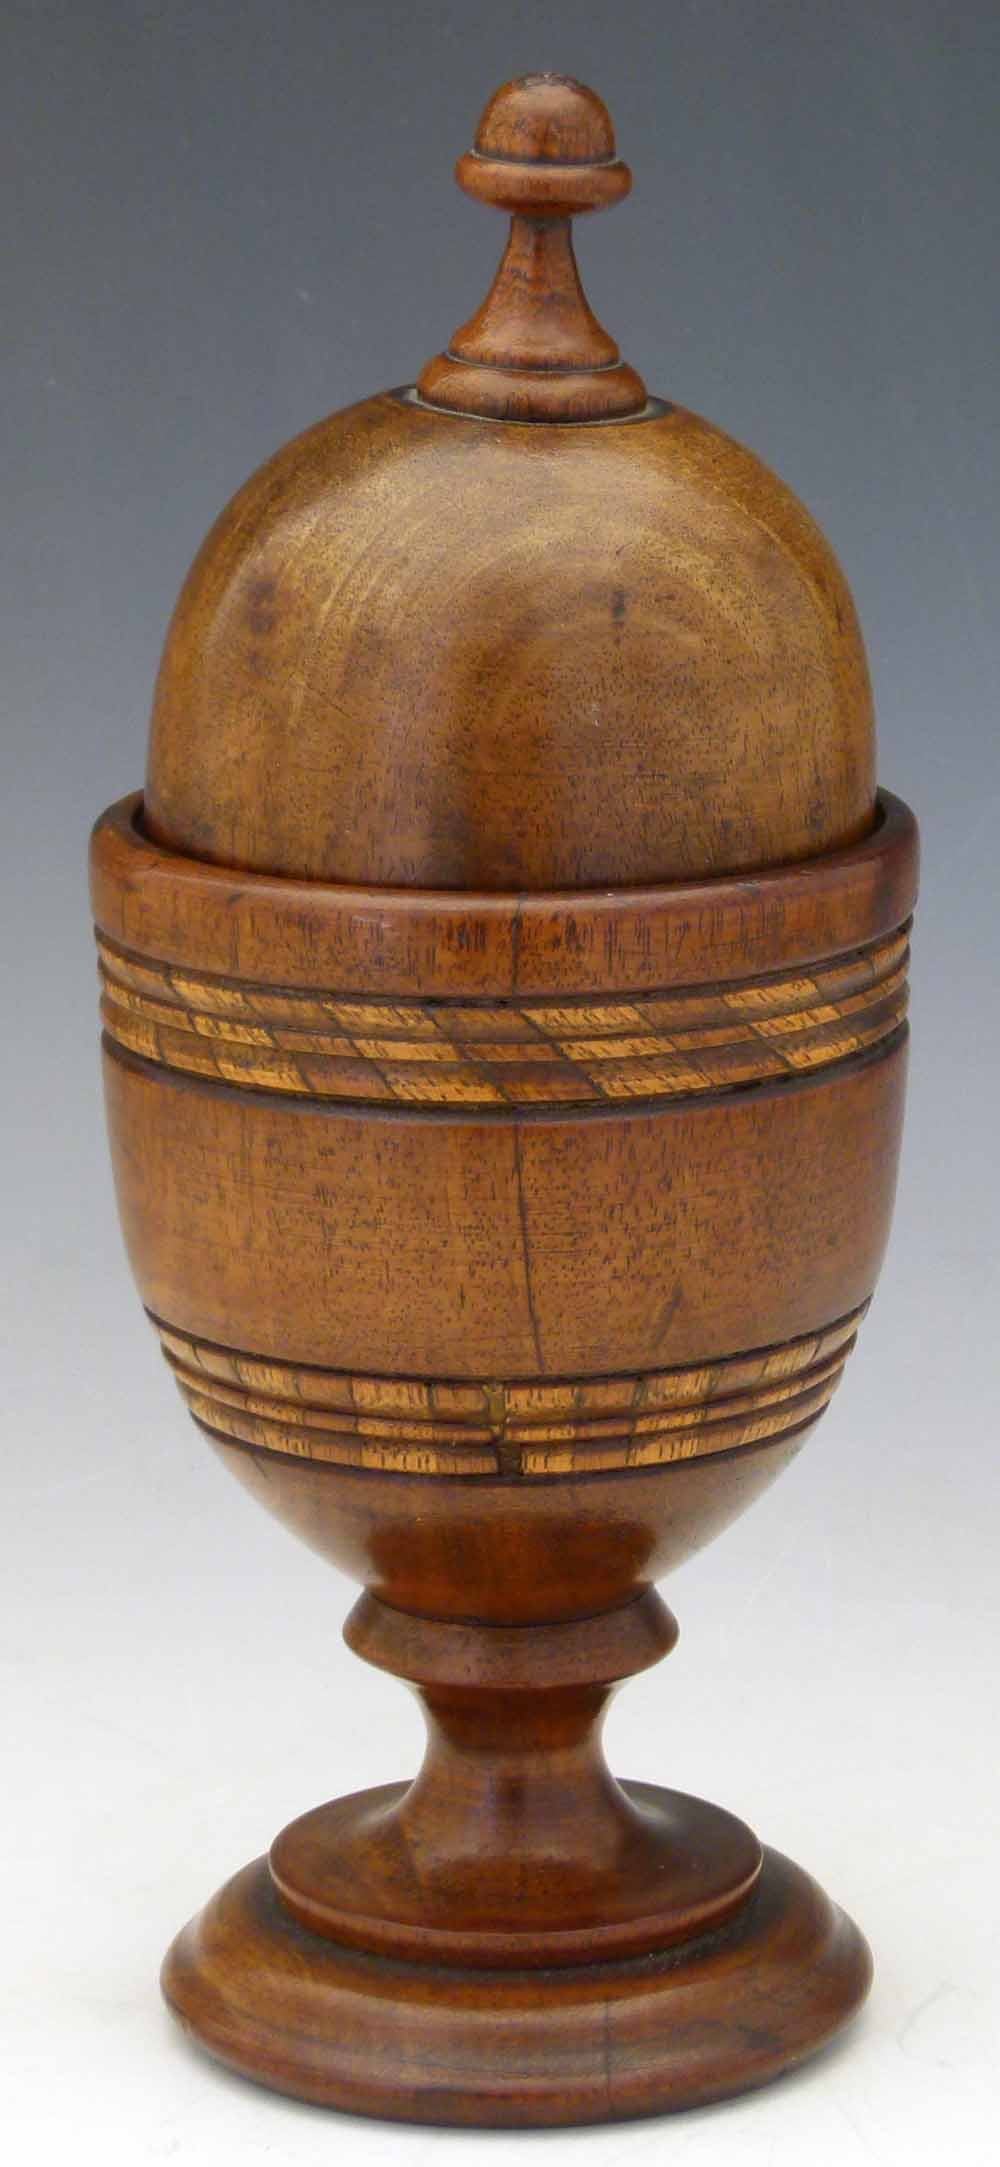 Turned wood pin cushion in the form of a cup and cover, height 25cm